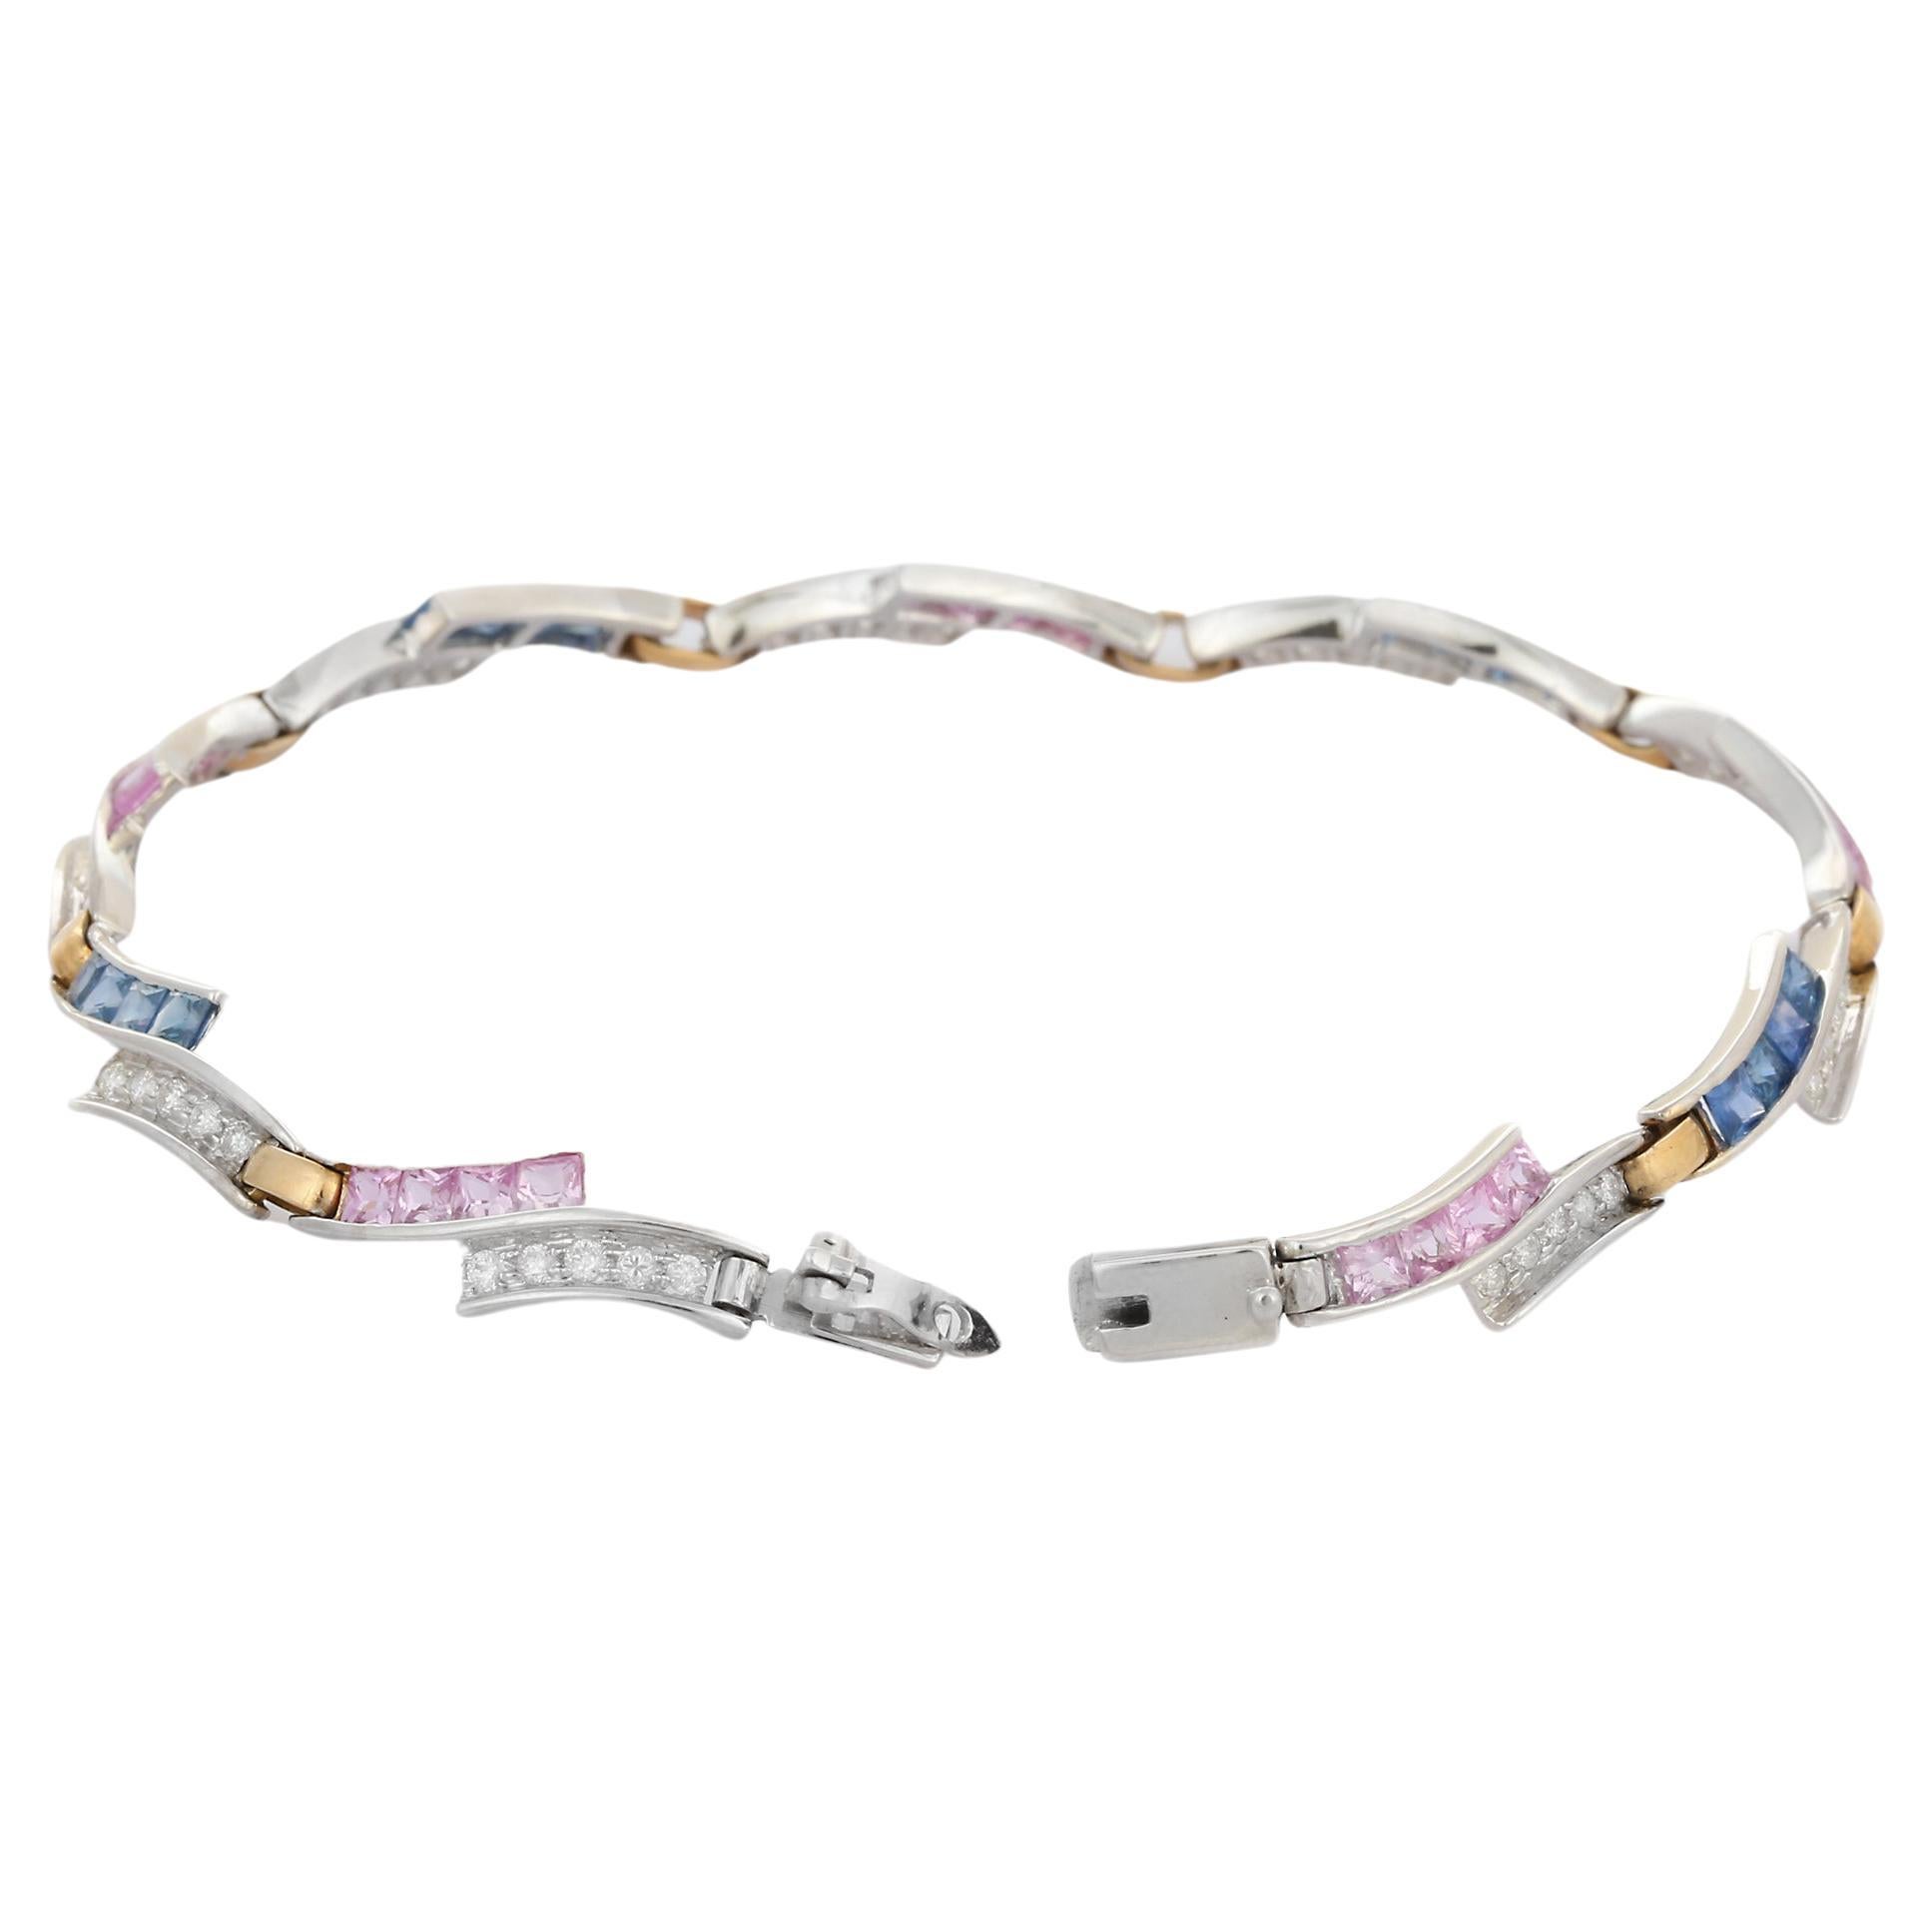 The wearing of charms may have begun as a form of amulet or talisman to ward off evil spirits or bad luck.
This multi sapphire bracelet has a square cut gemstone and diamonds in 18K Gold. A perfect piece of jewelry to adorn your jewelry